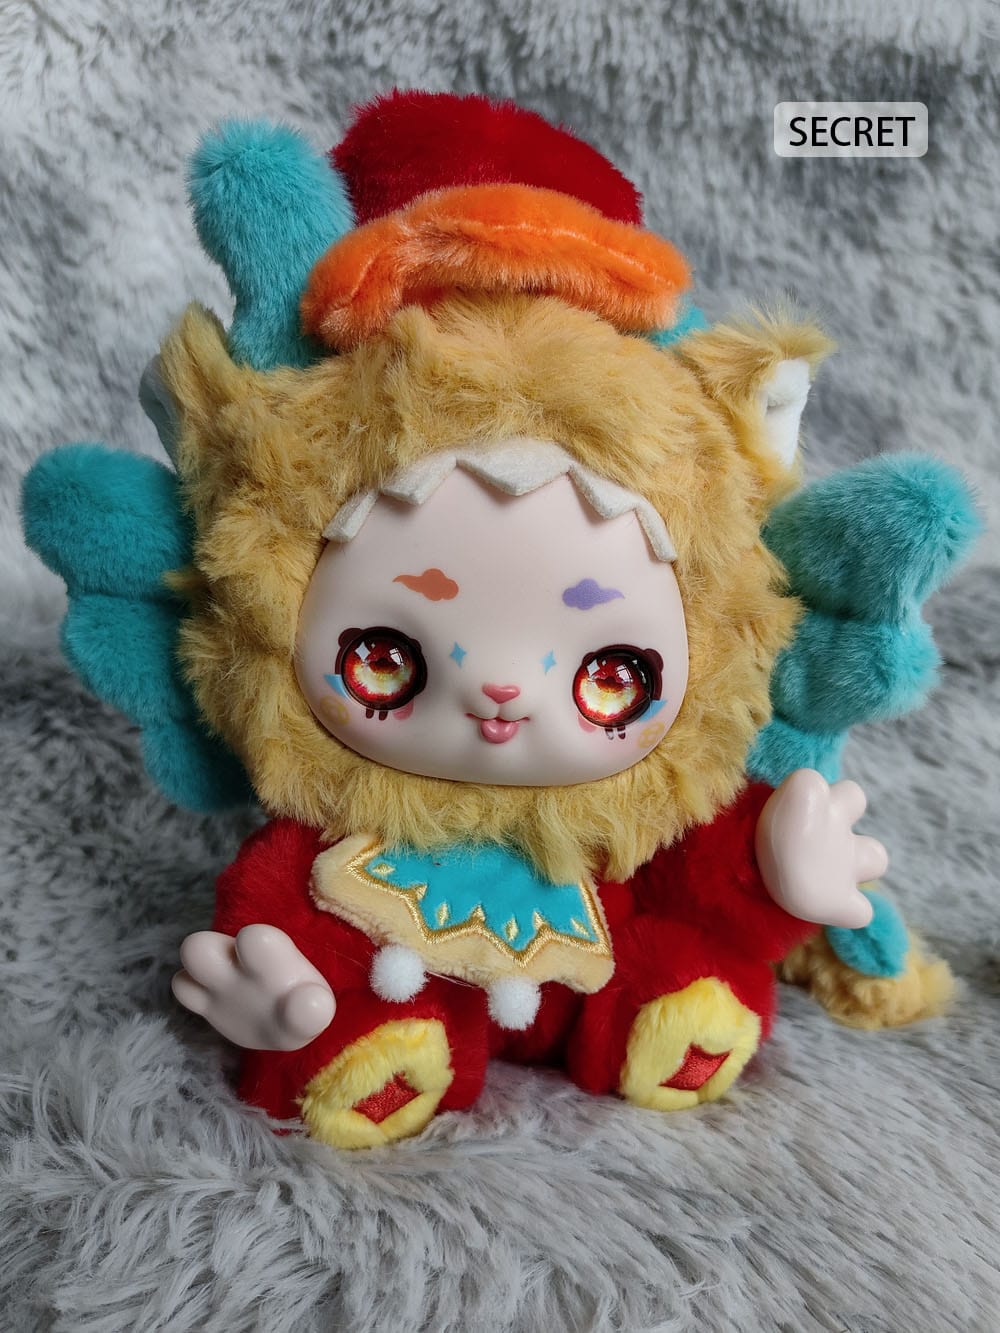 Kimmon All Looking Forward to sth. Series 3 Plush Blind Box